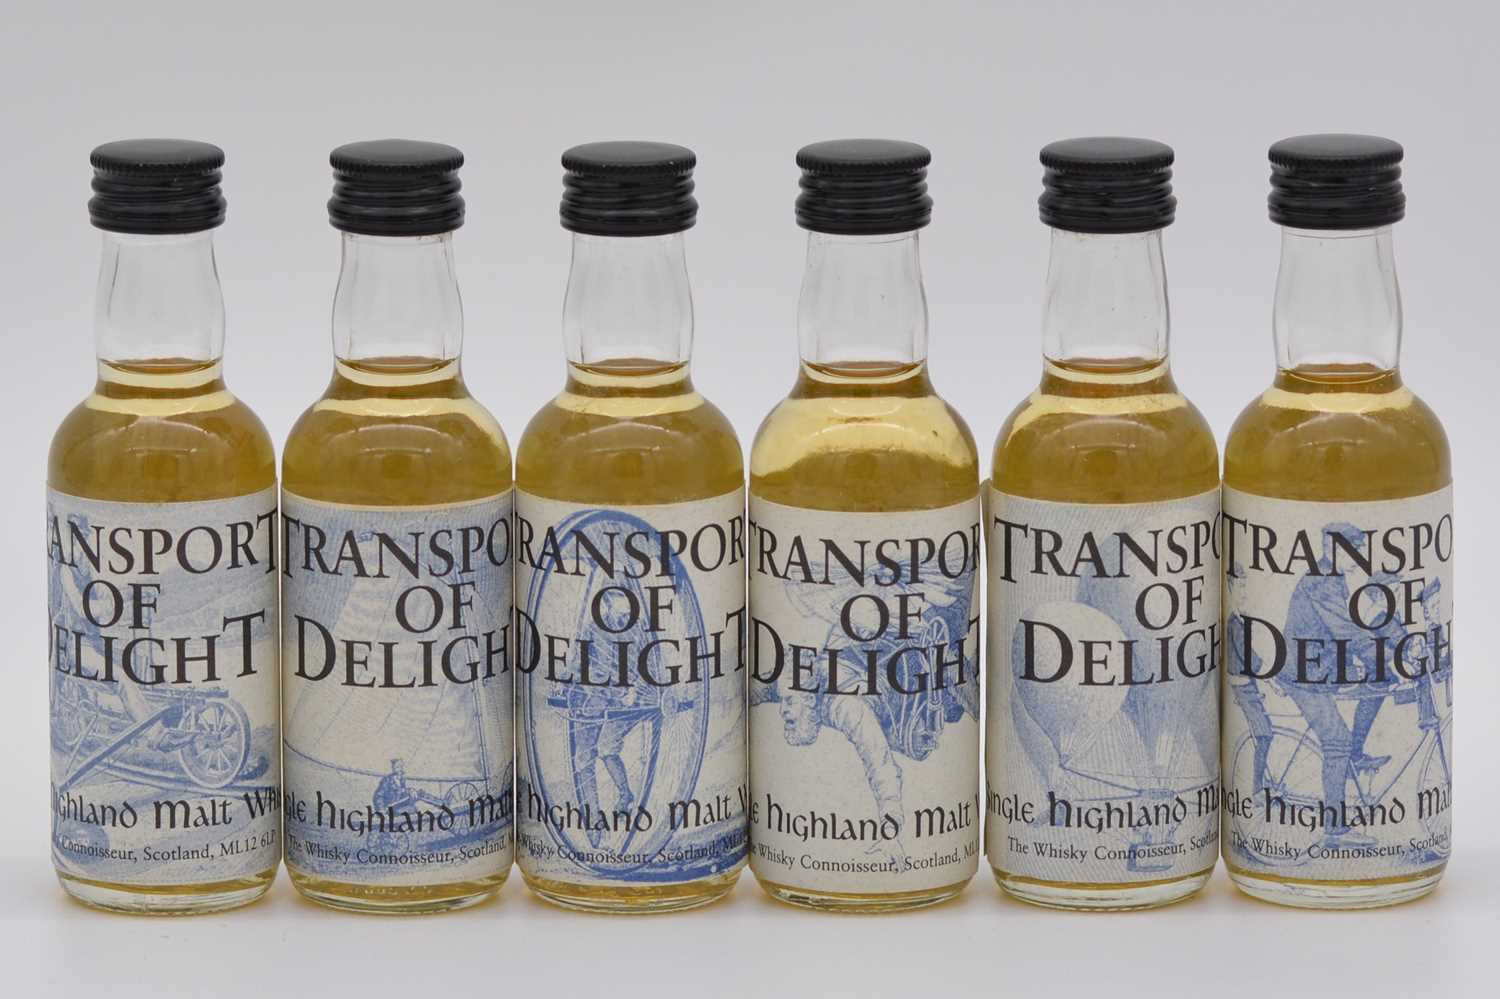 Lot 101 - The Whisky Connoisseur - the complete Transport of Delight miniatures series